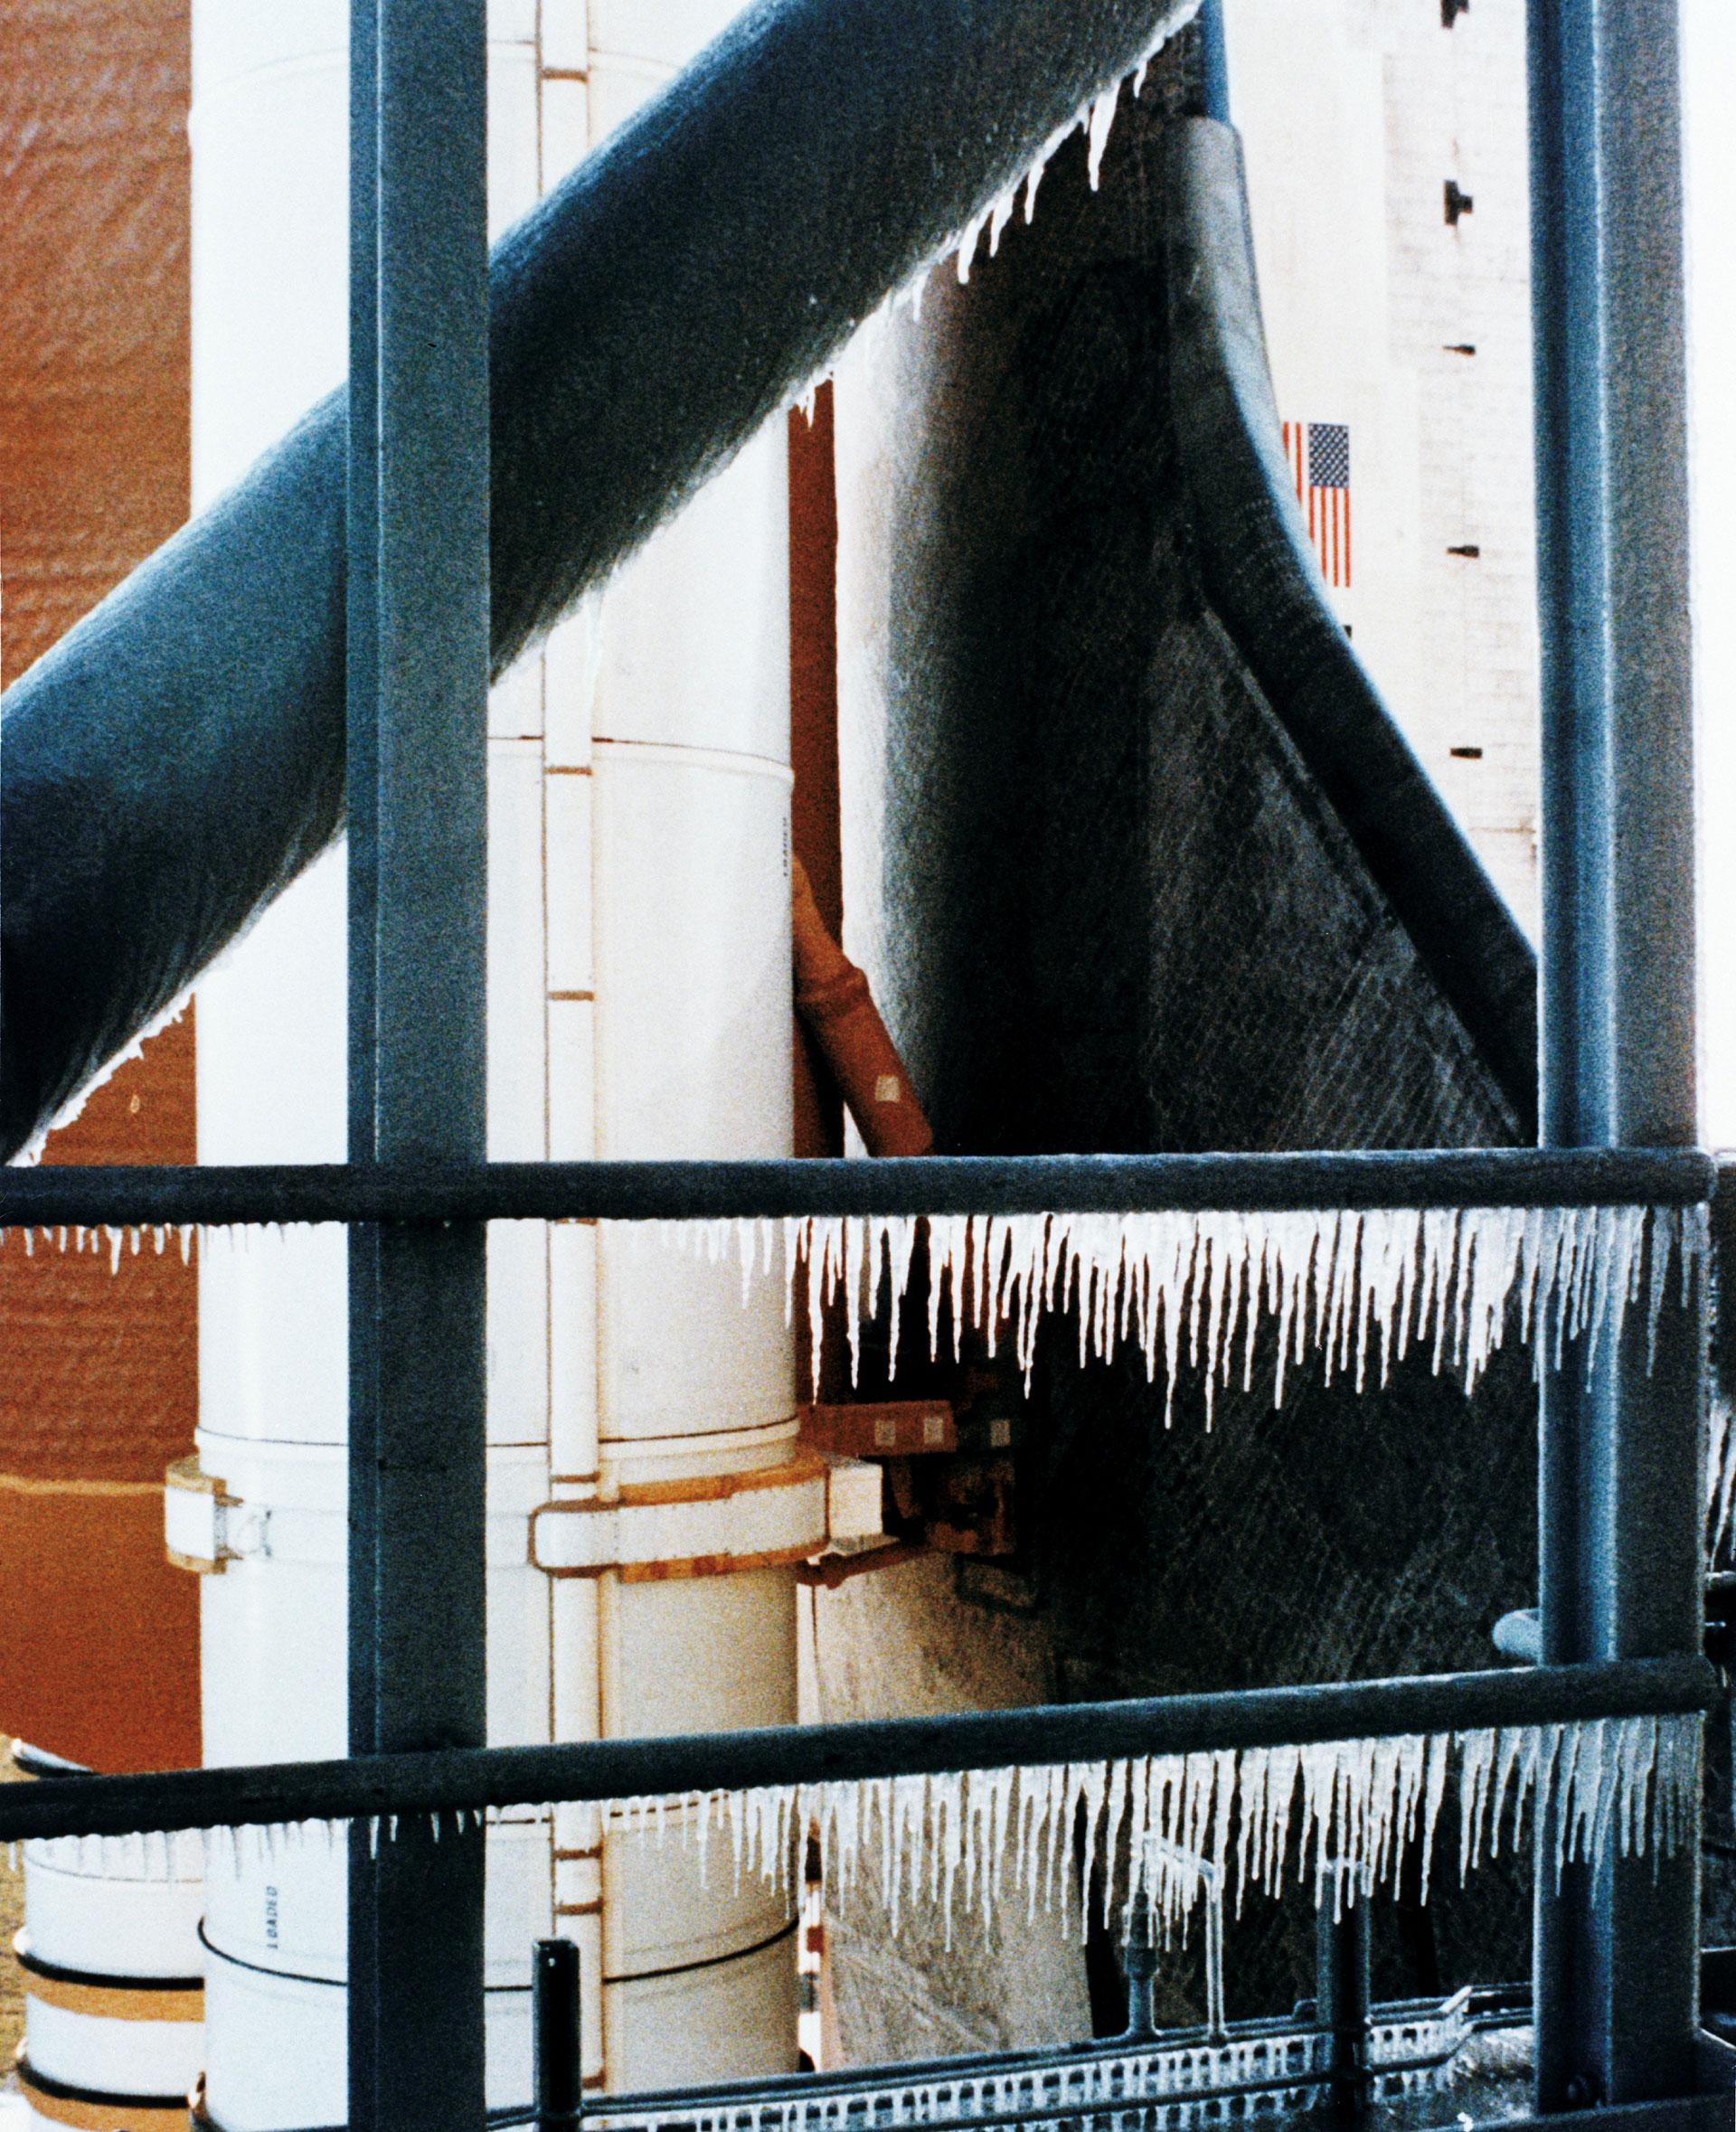 icicles hang from a metal railing in front of a space shuttle